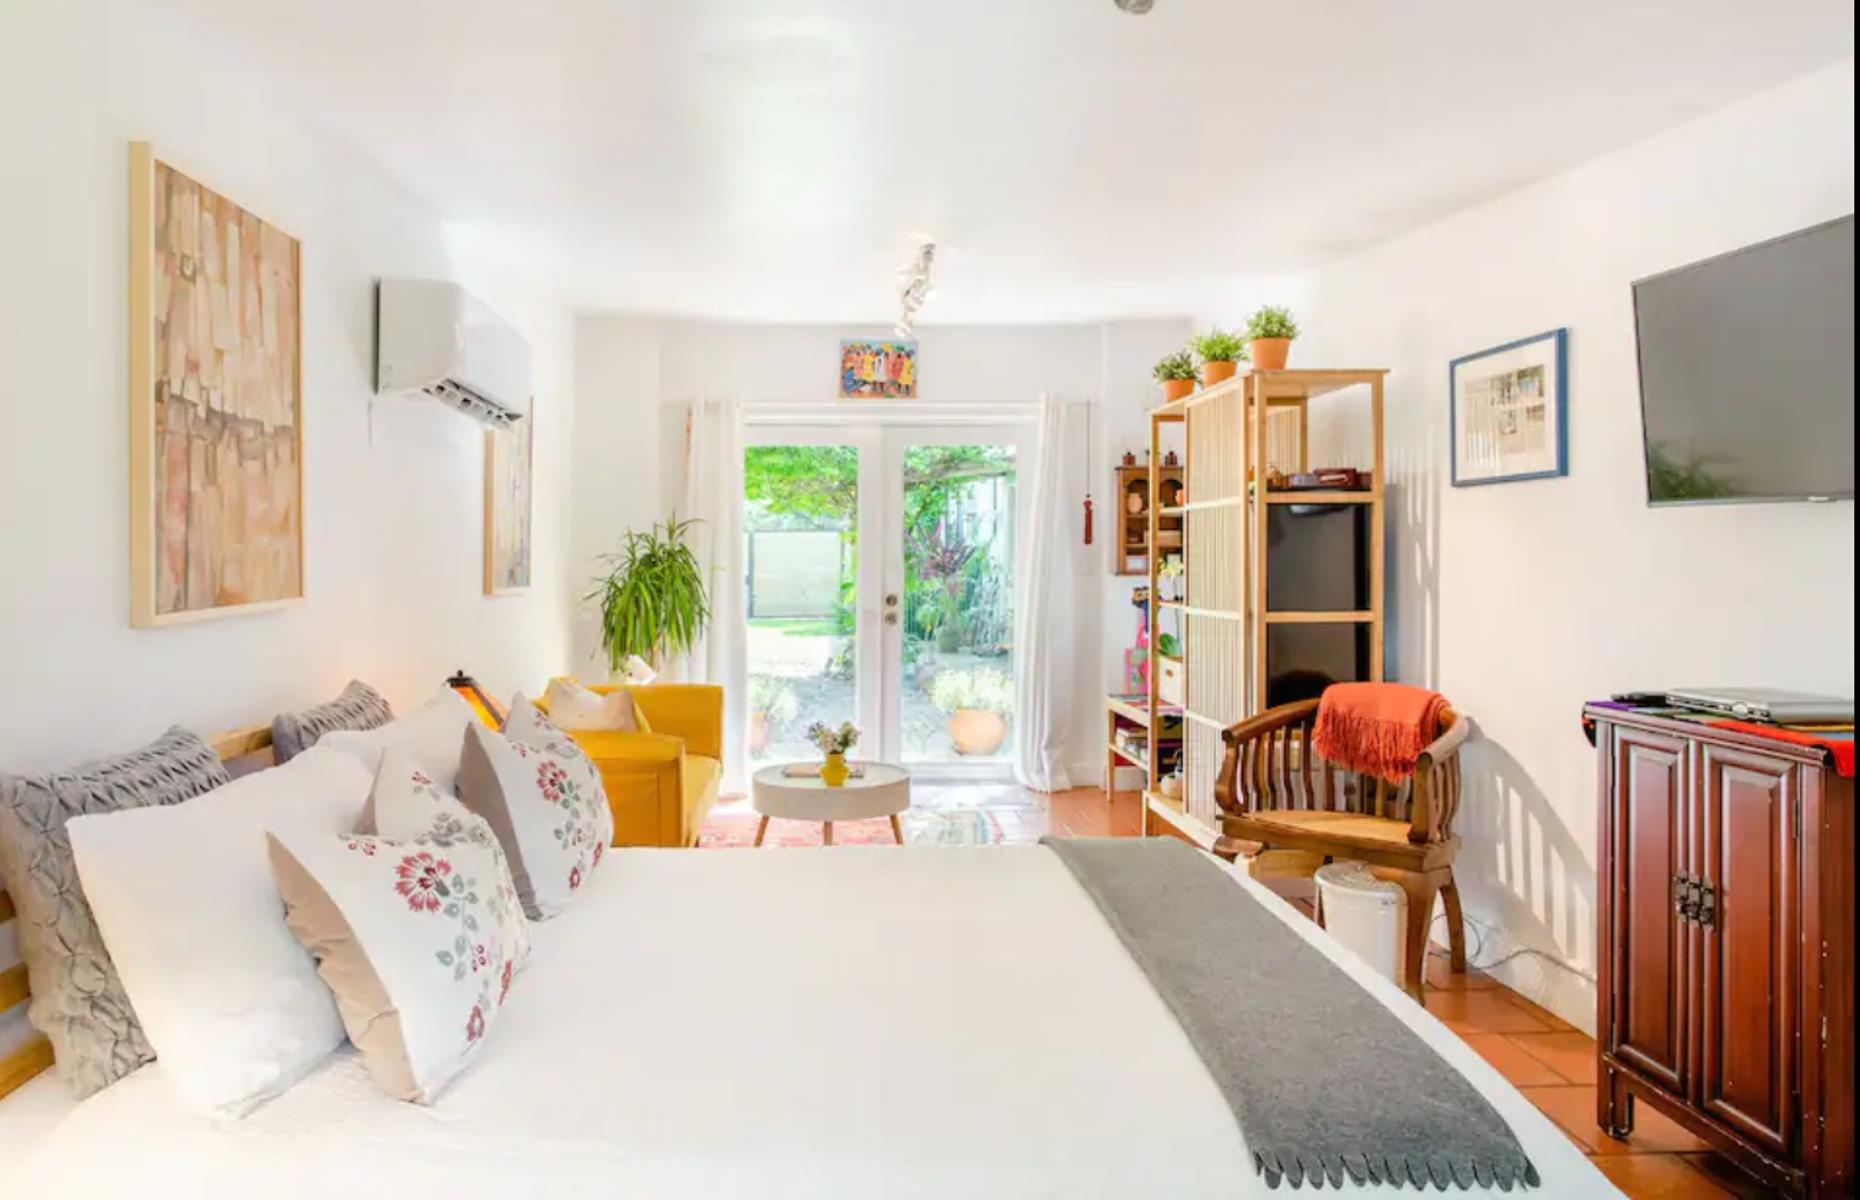 <p>Located just a 15-minute walk from the beach in Biscayne Park, just outside Miami, <a href="https://www.airbnb.co.uk/rooms/4293449">this oh-so-pretty cottage</a> is surrounded by charming tropical gardens and comes with use of the owners’ pool and cabana. Available from around $100 per night with a three-night minimum stay, the cottage has free parking and is beautifully furnished inside. It comes with a microwave and refrigerator, and windows frame views of the palm-tree-filled garden.</p>